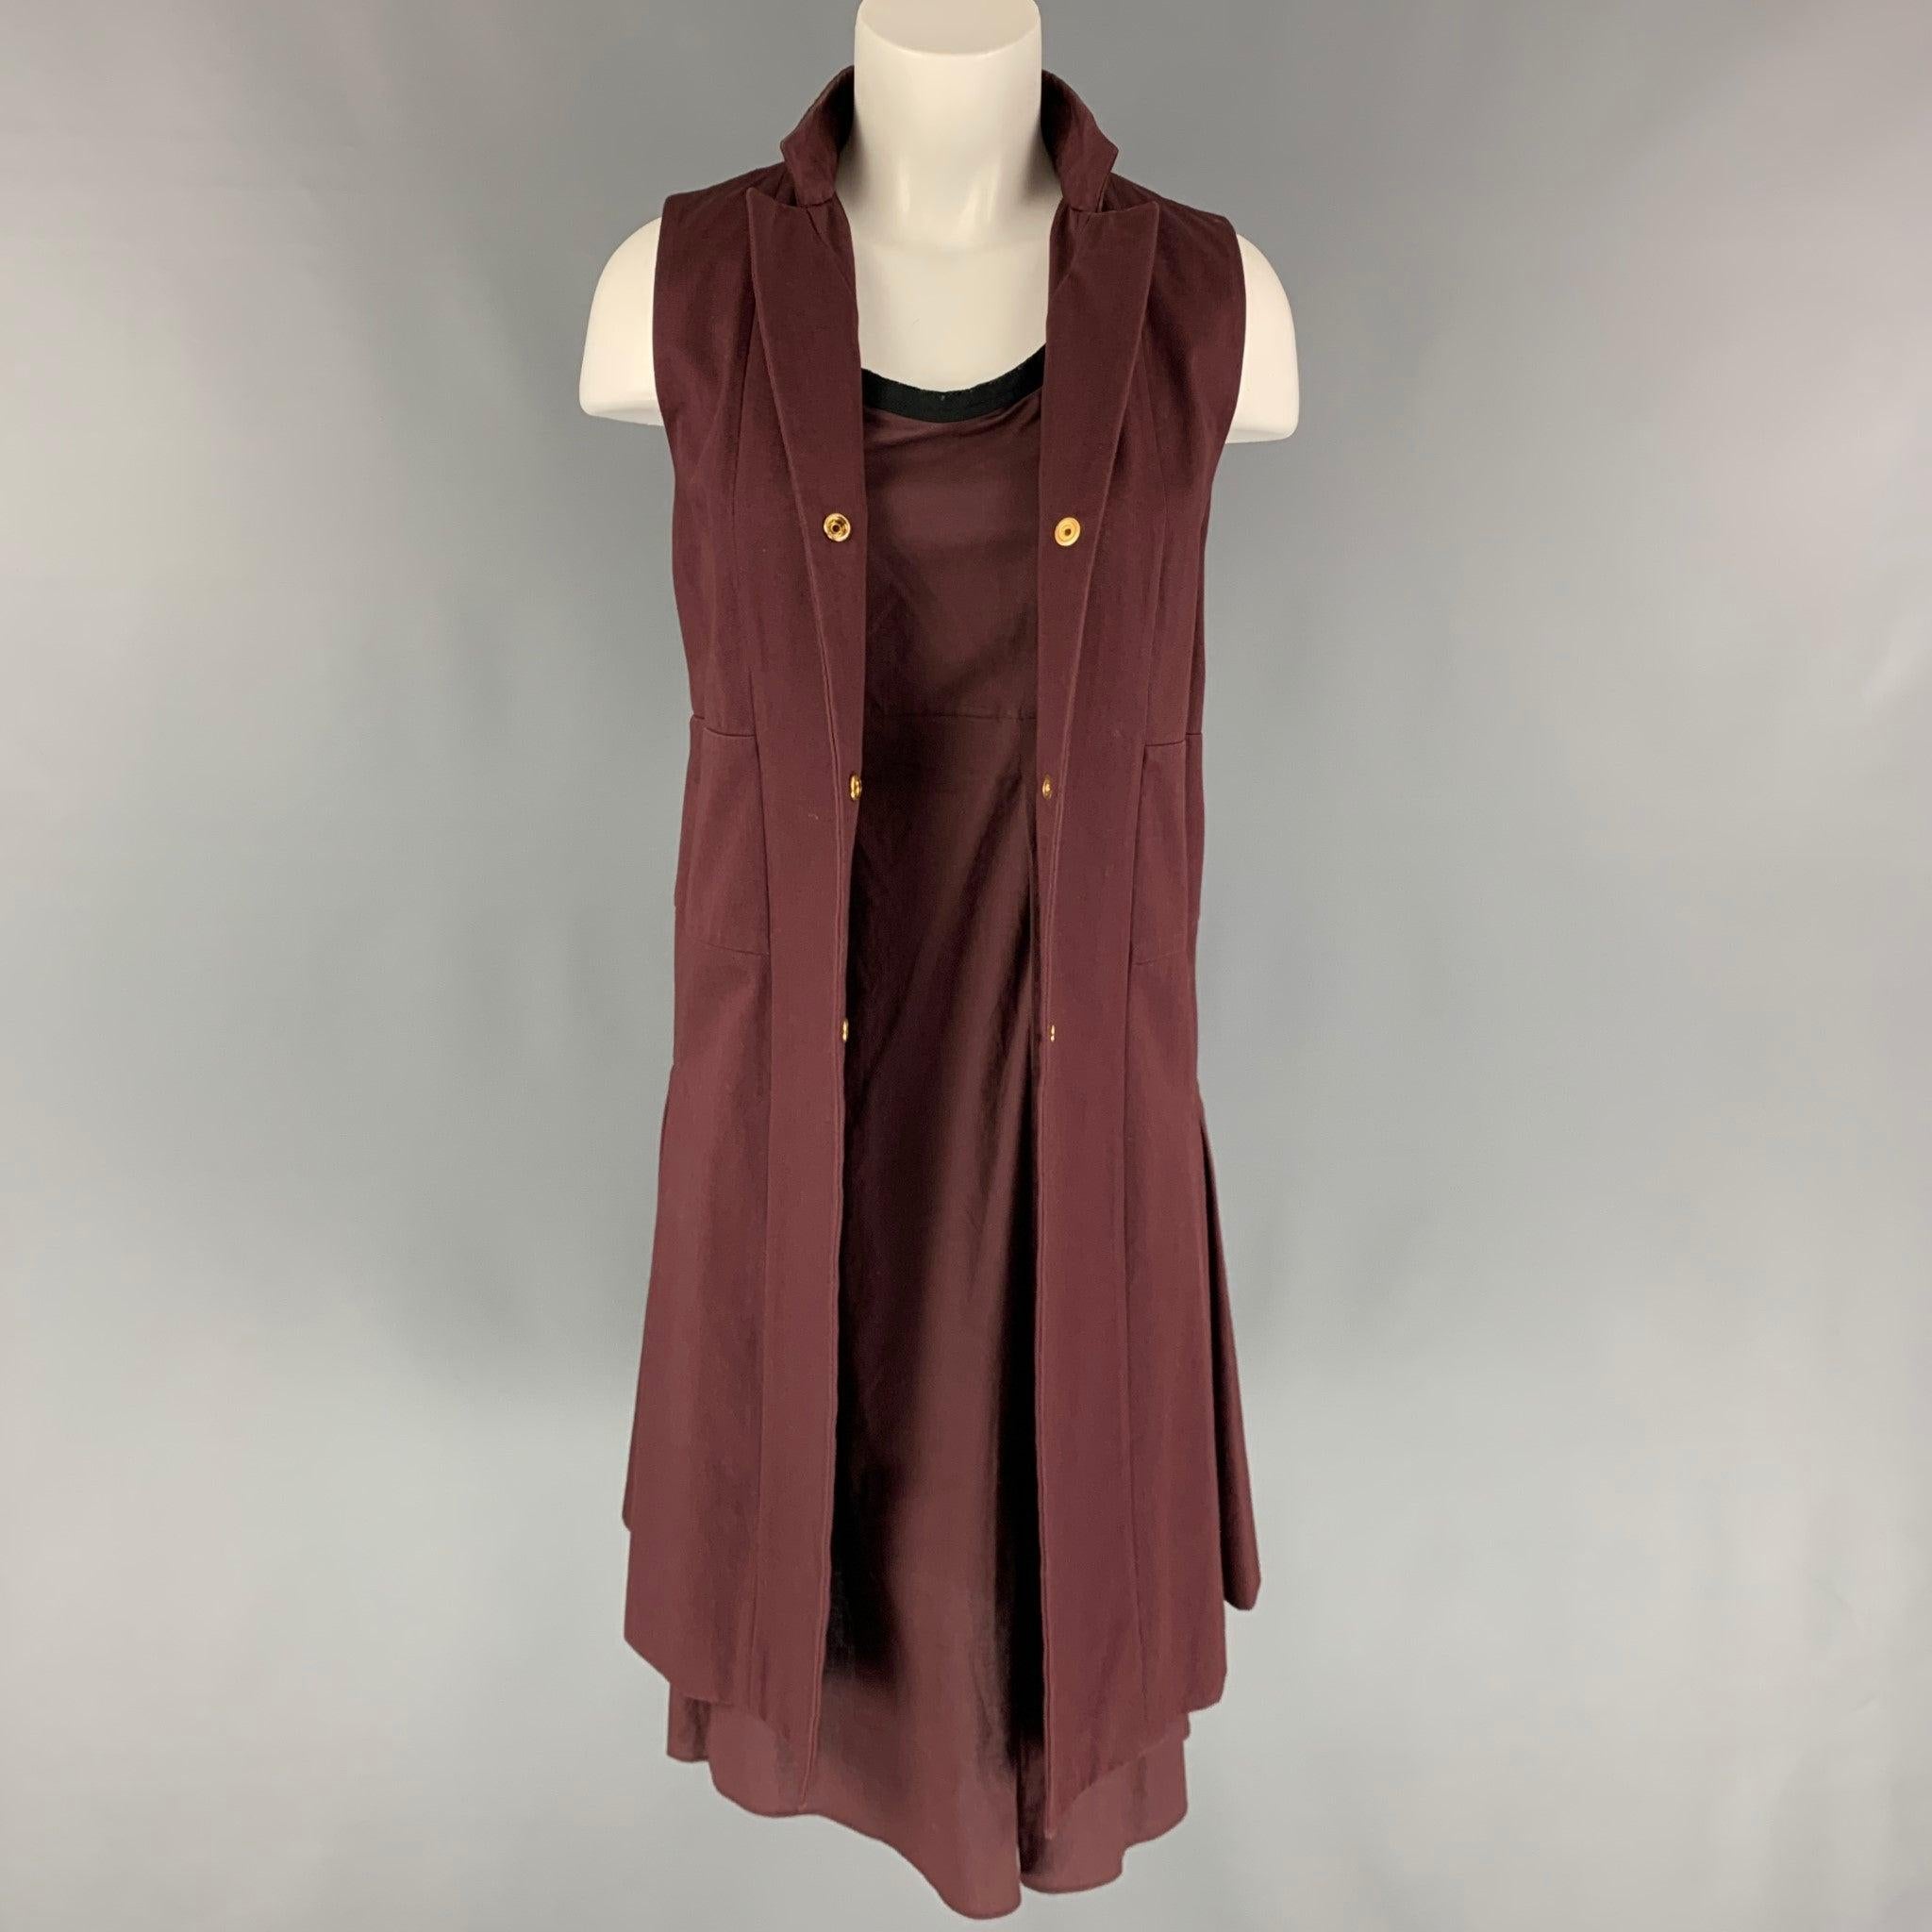 MARNI SS 13 Size 4 Burgundy Cotton Sleeveless 2 Piece Dress Set In Good Condition For Sale In San Francisco, CA